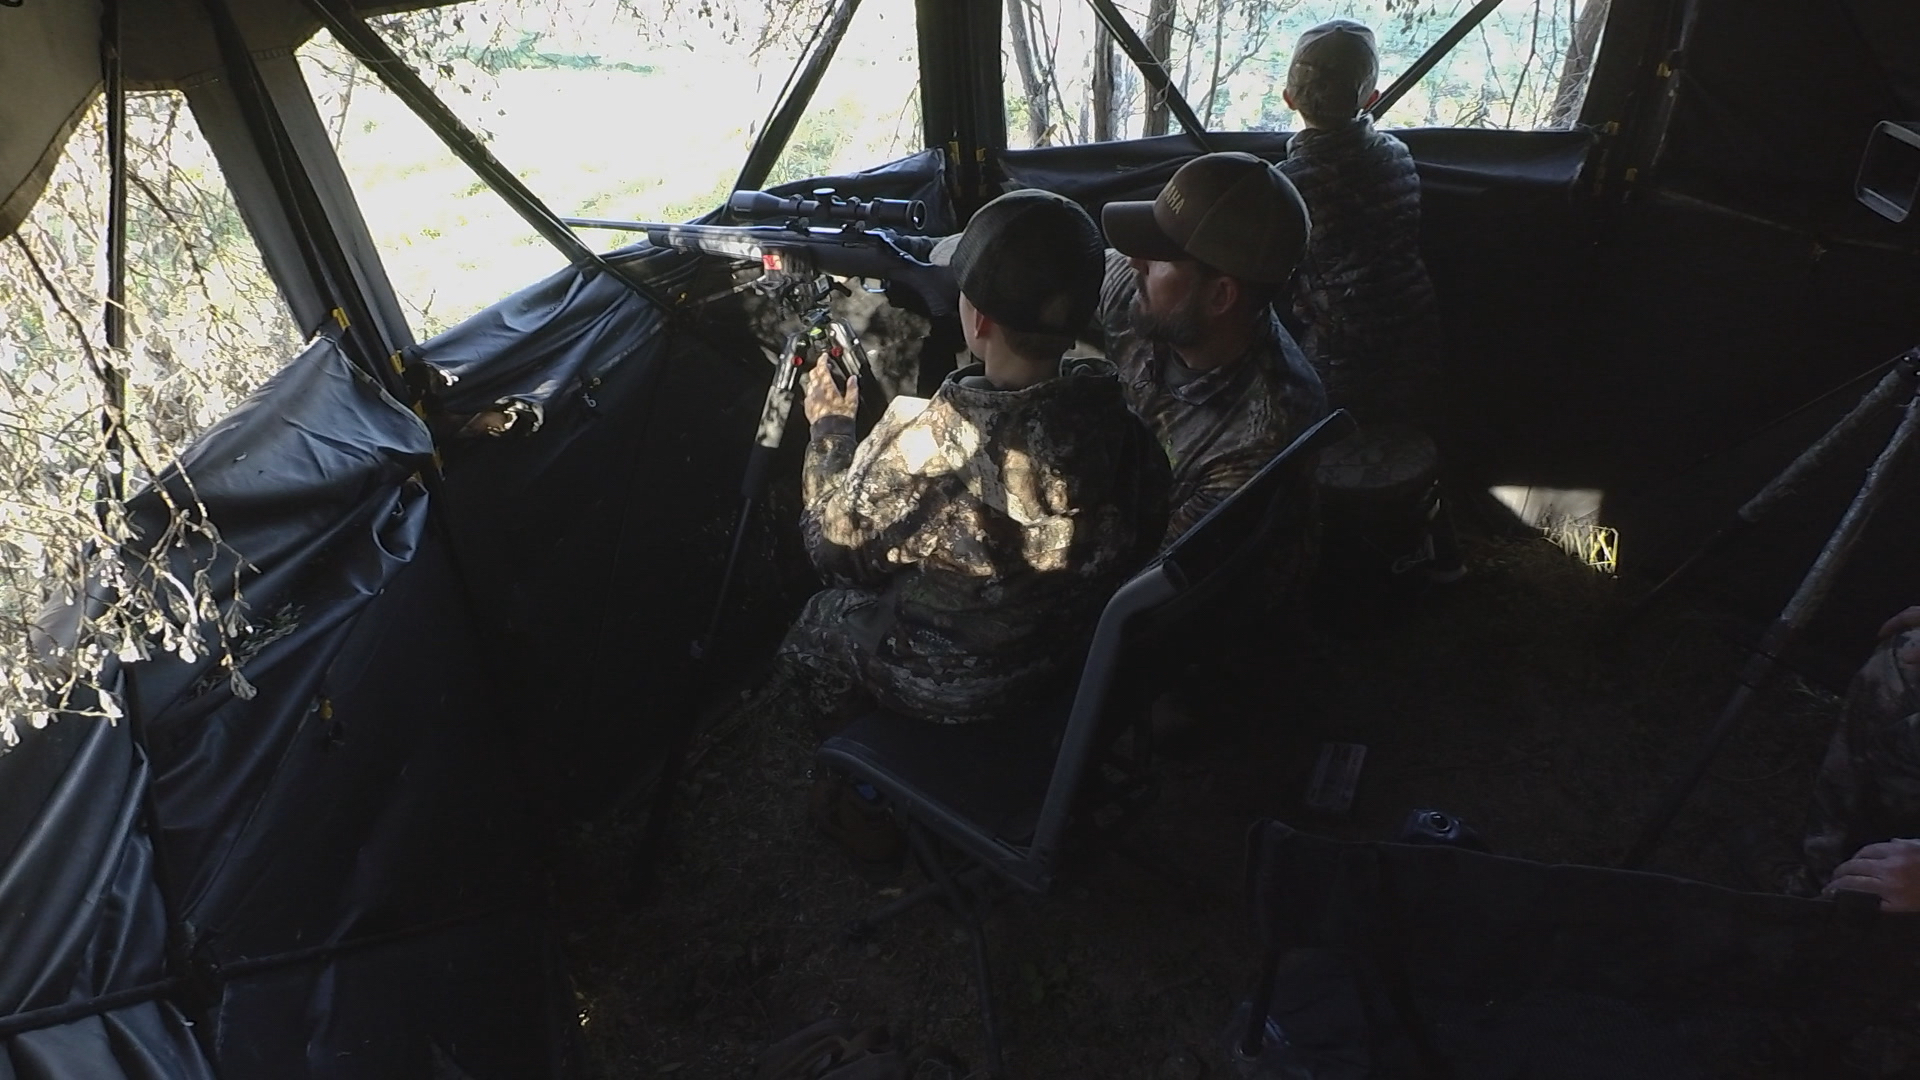 Landon (left) gets insturciton for his father Steve while Callen keeps an eye out for deer.